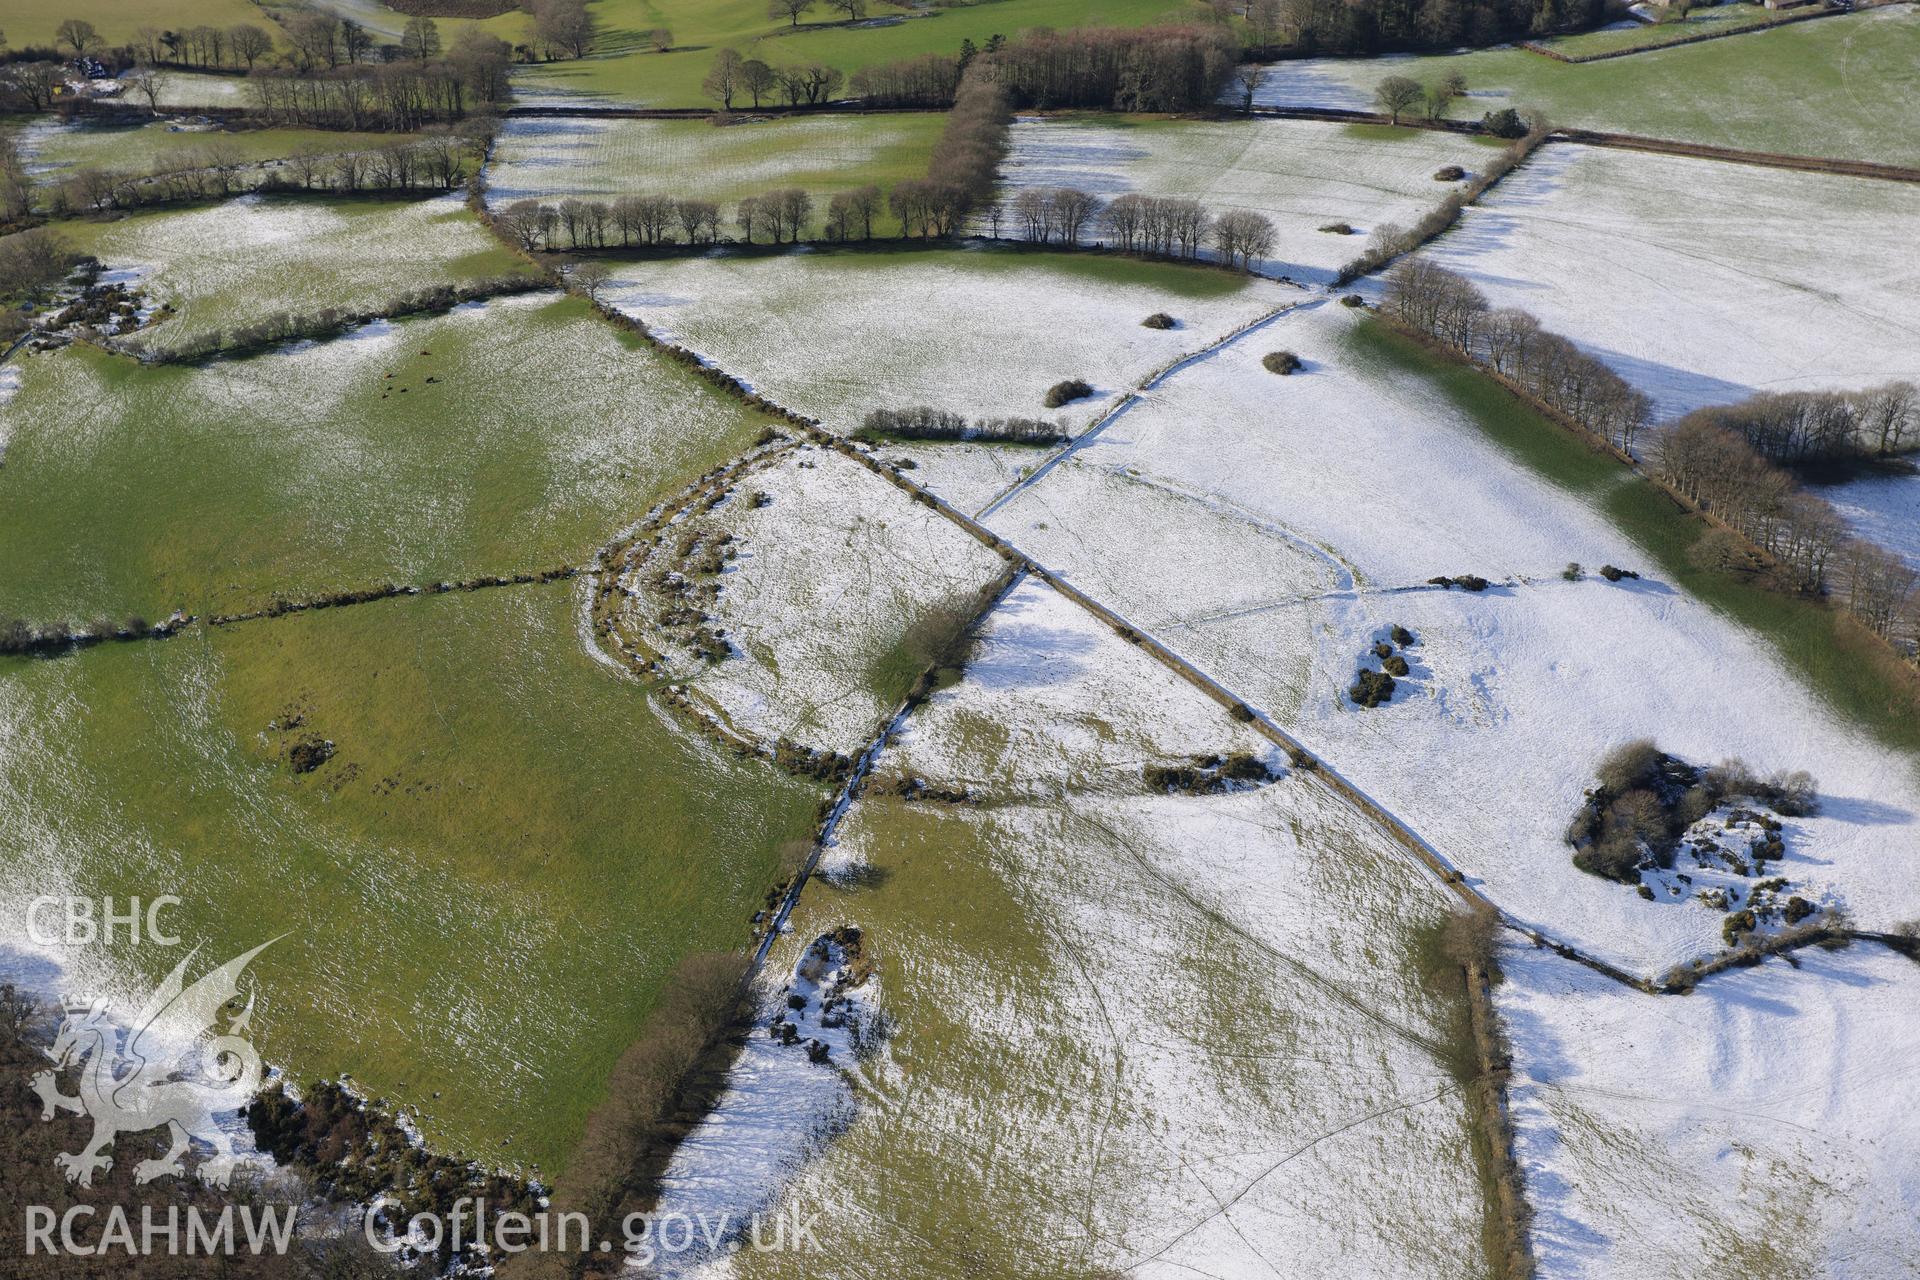 Pencoed y Foel hillfort, north east of Llandysul. Oblique aerial photograph taken during the Royal Commission's programme of archaeological aerial reconnaissance by Toby Driver on 4th February 2015.